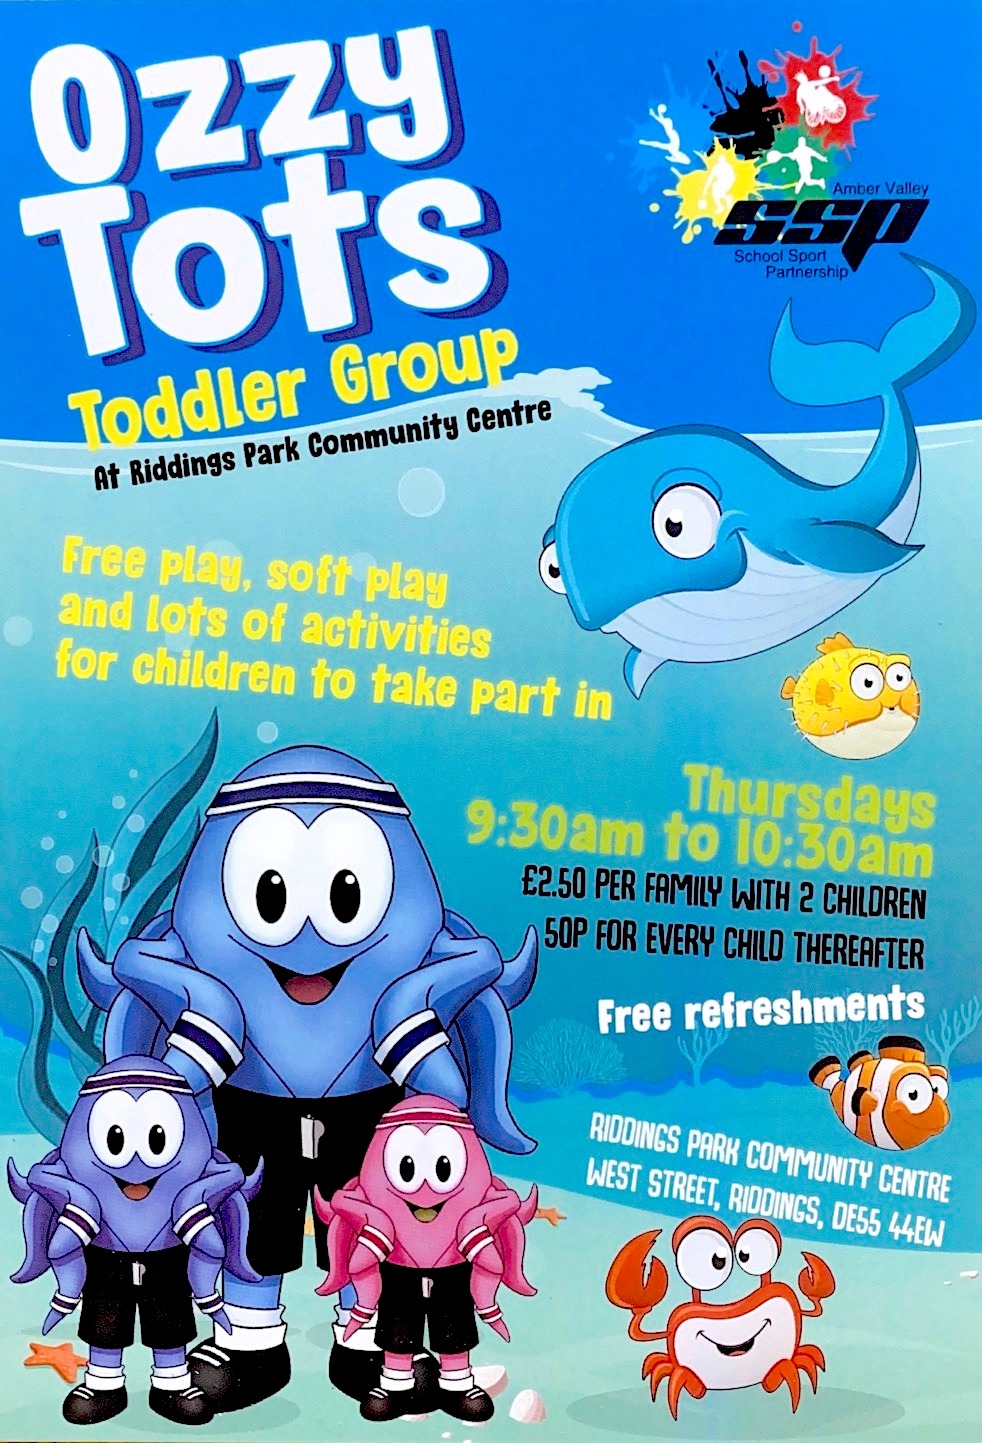 Ozzy Tots Toddler Group at Riddings Park Community Centre